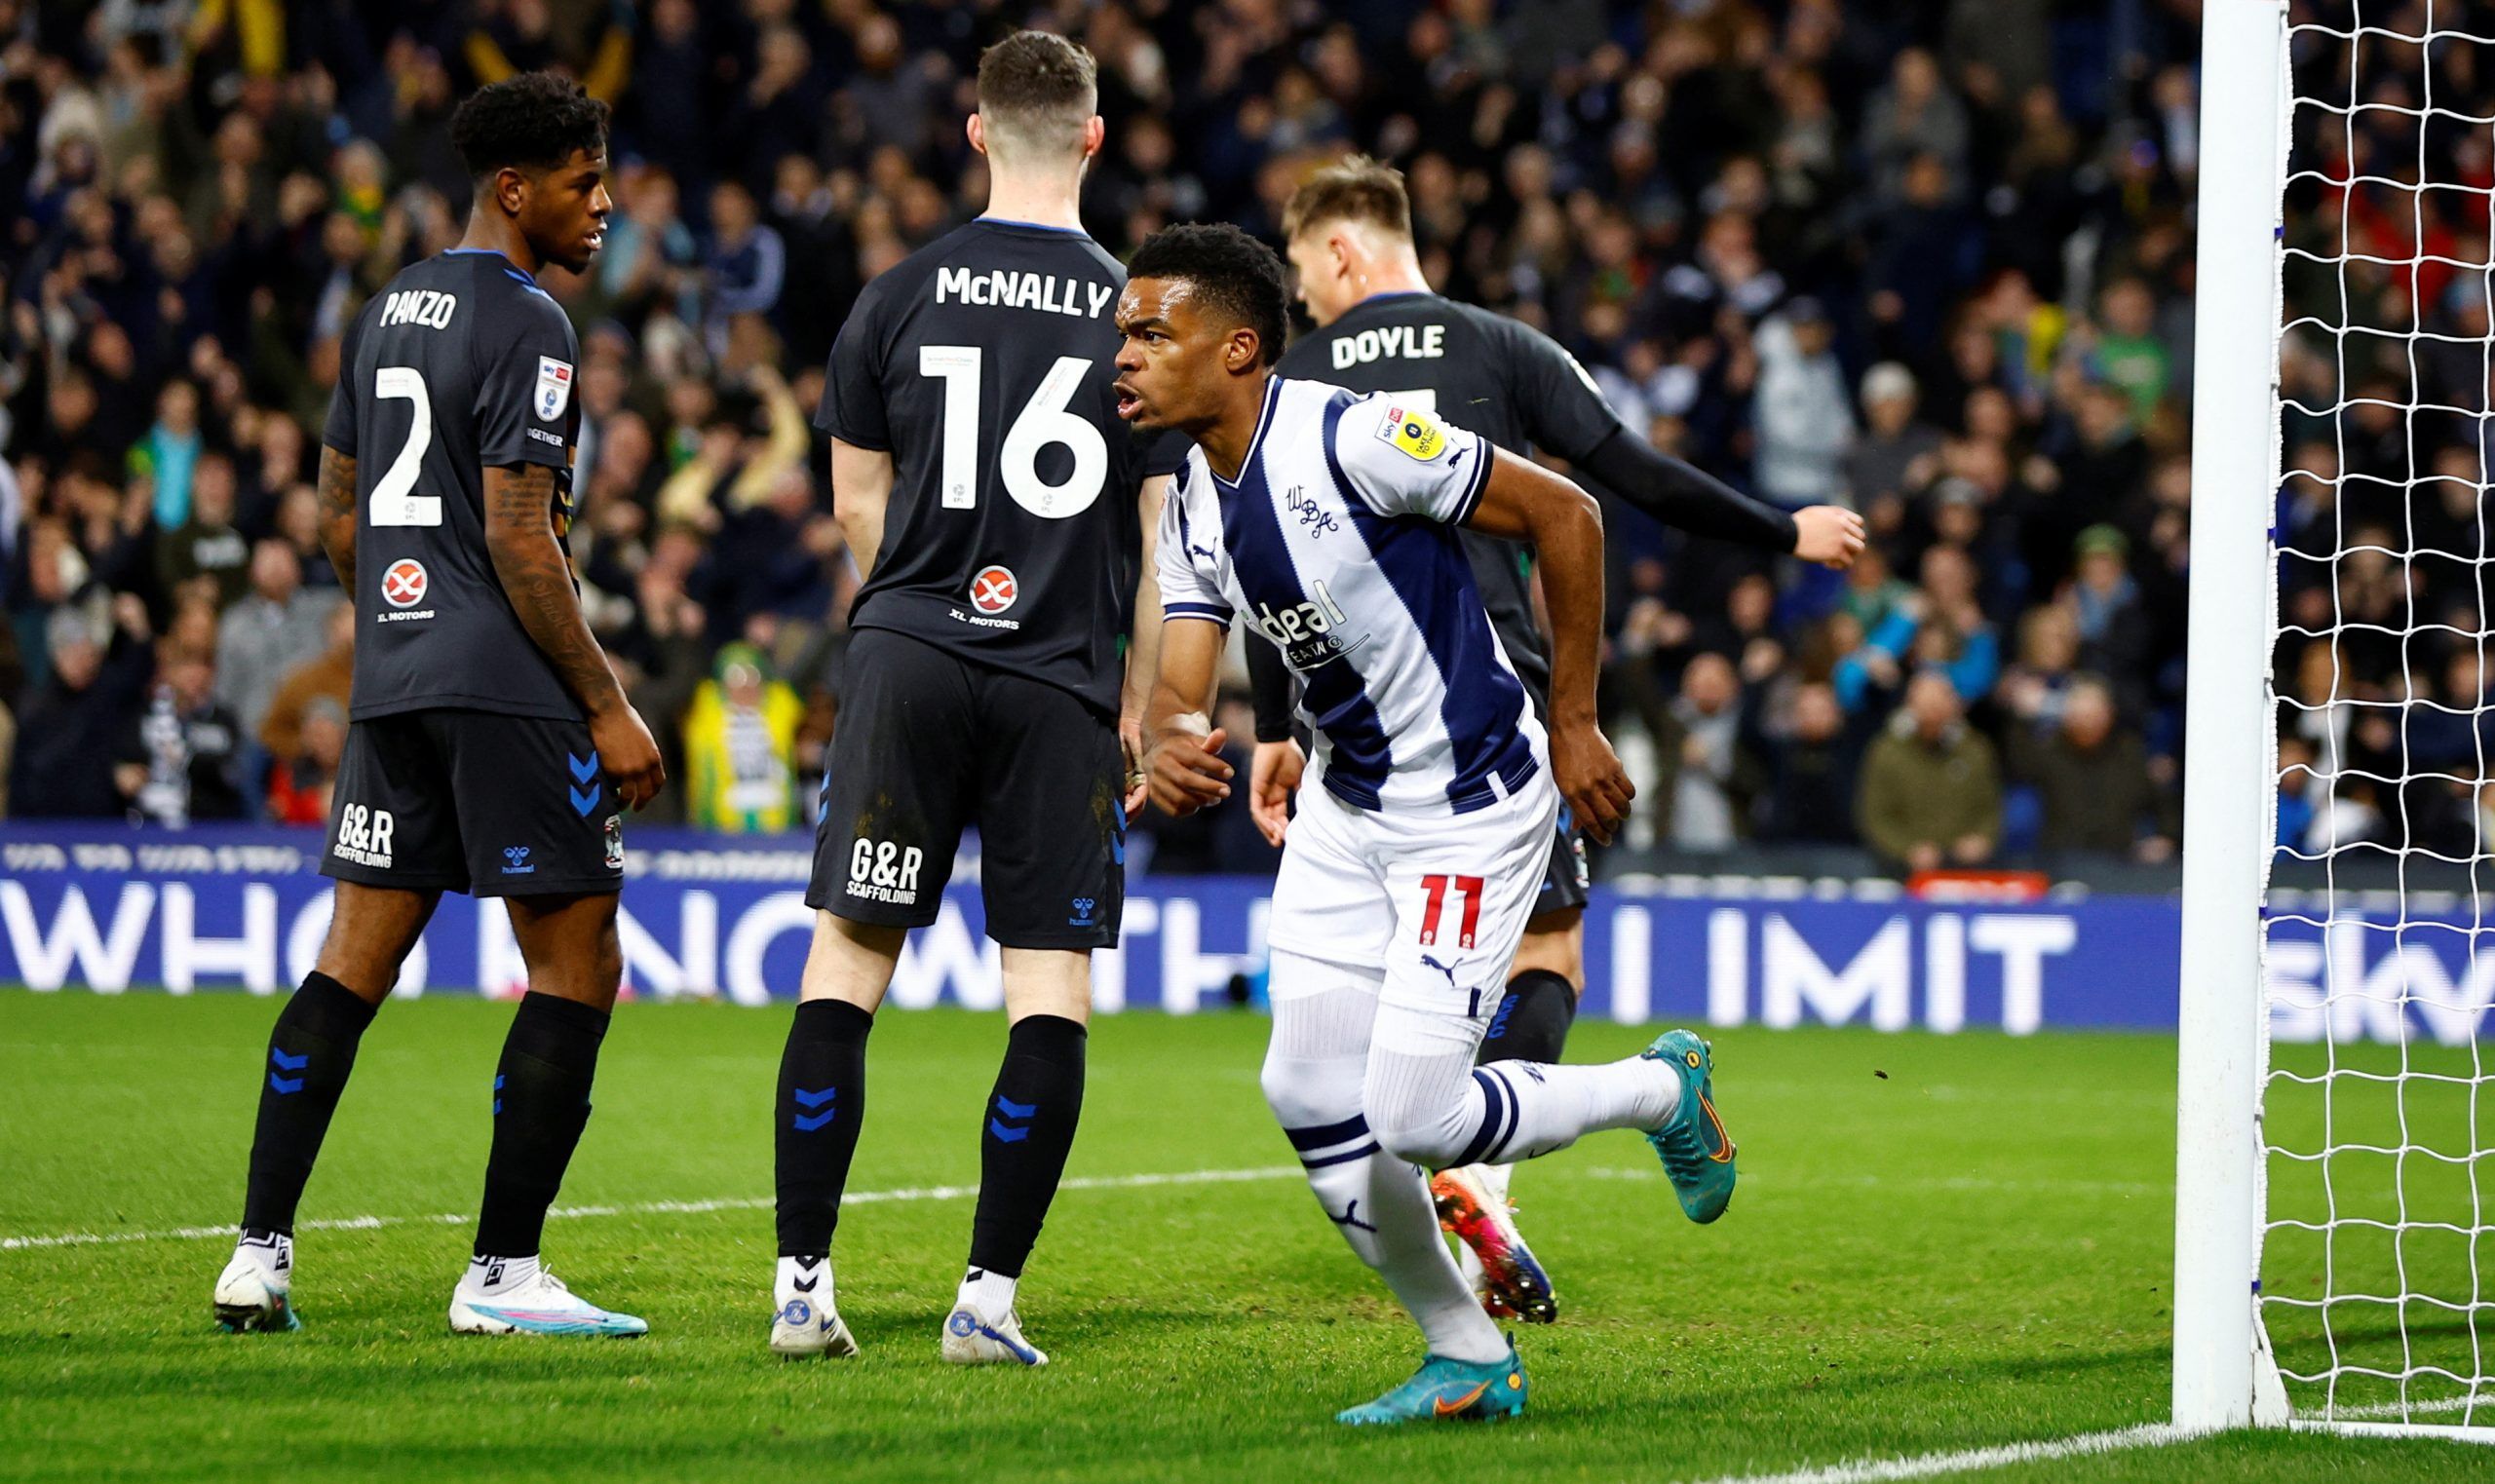 Soccer Football - Championship - West Bromwich Albion v Coventry City - The Hawthorns, West Bromwich, Britain - February 3, 2023  West Bromwich Albion's Grady Diangana celebrates after scoring their first goal  Action Images/John Sibley  EDITORIAL USE ONLY. No use with unauthorized audio, video, data, fixture lists, club/league logos or 